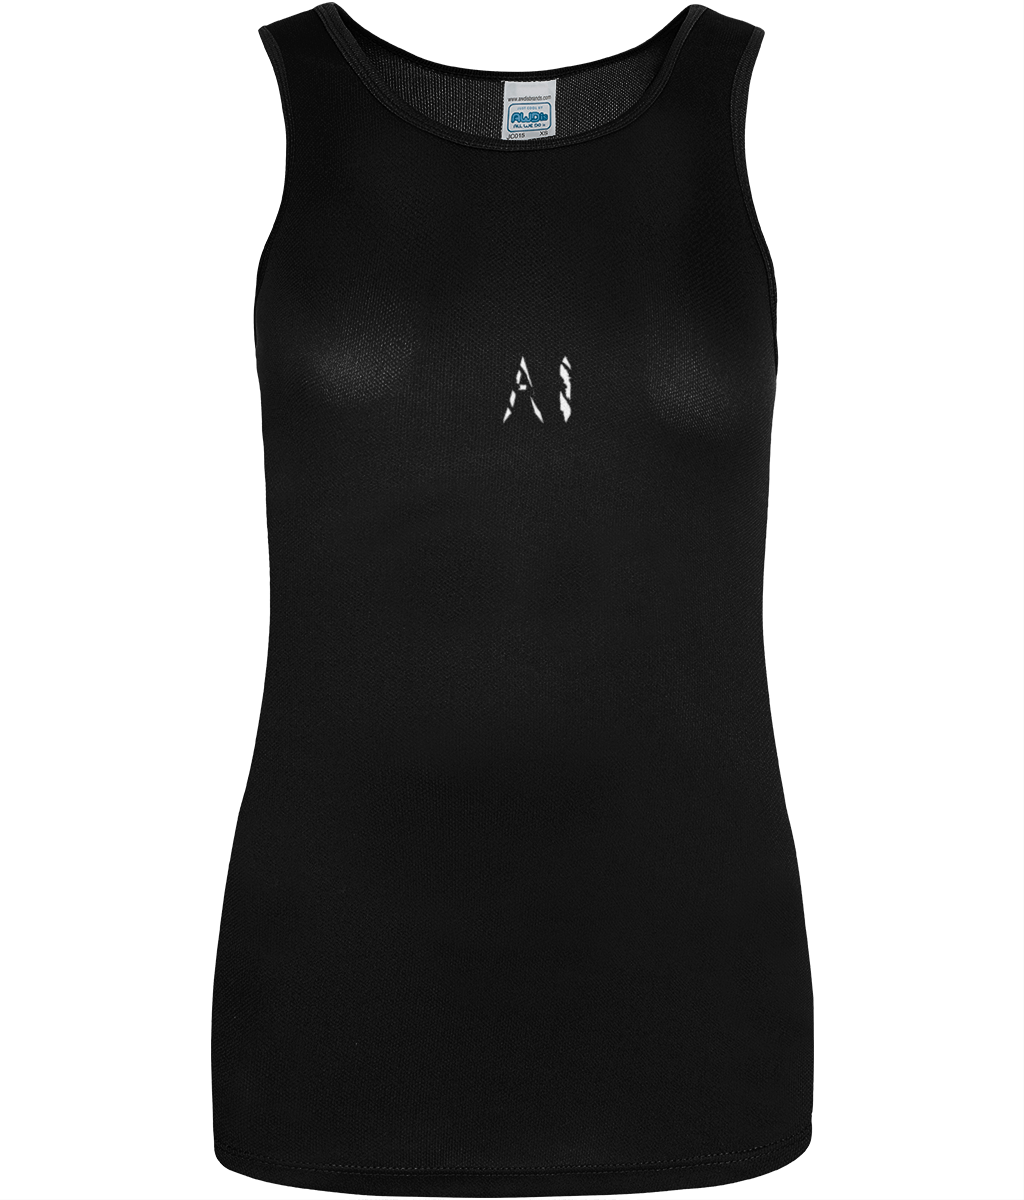 Womens black Workout Sports Vest with white AI logo in centre chest